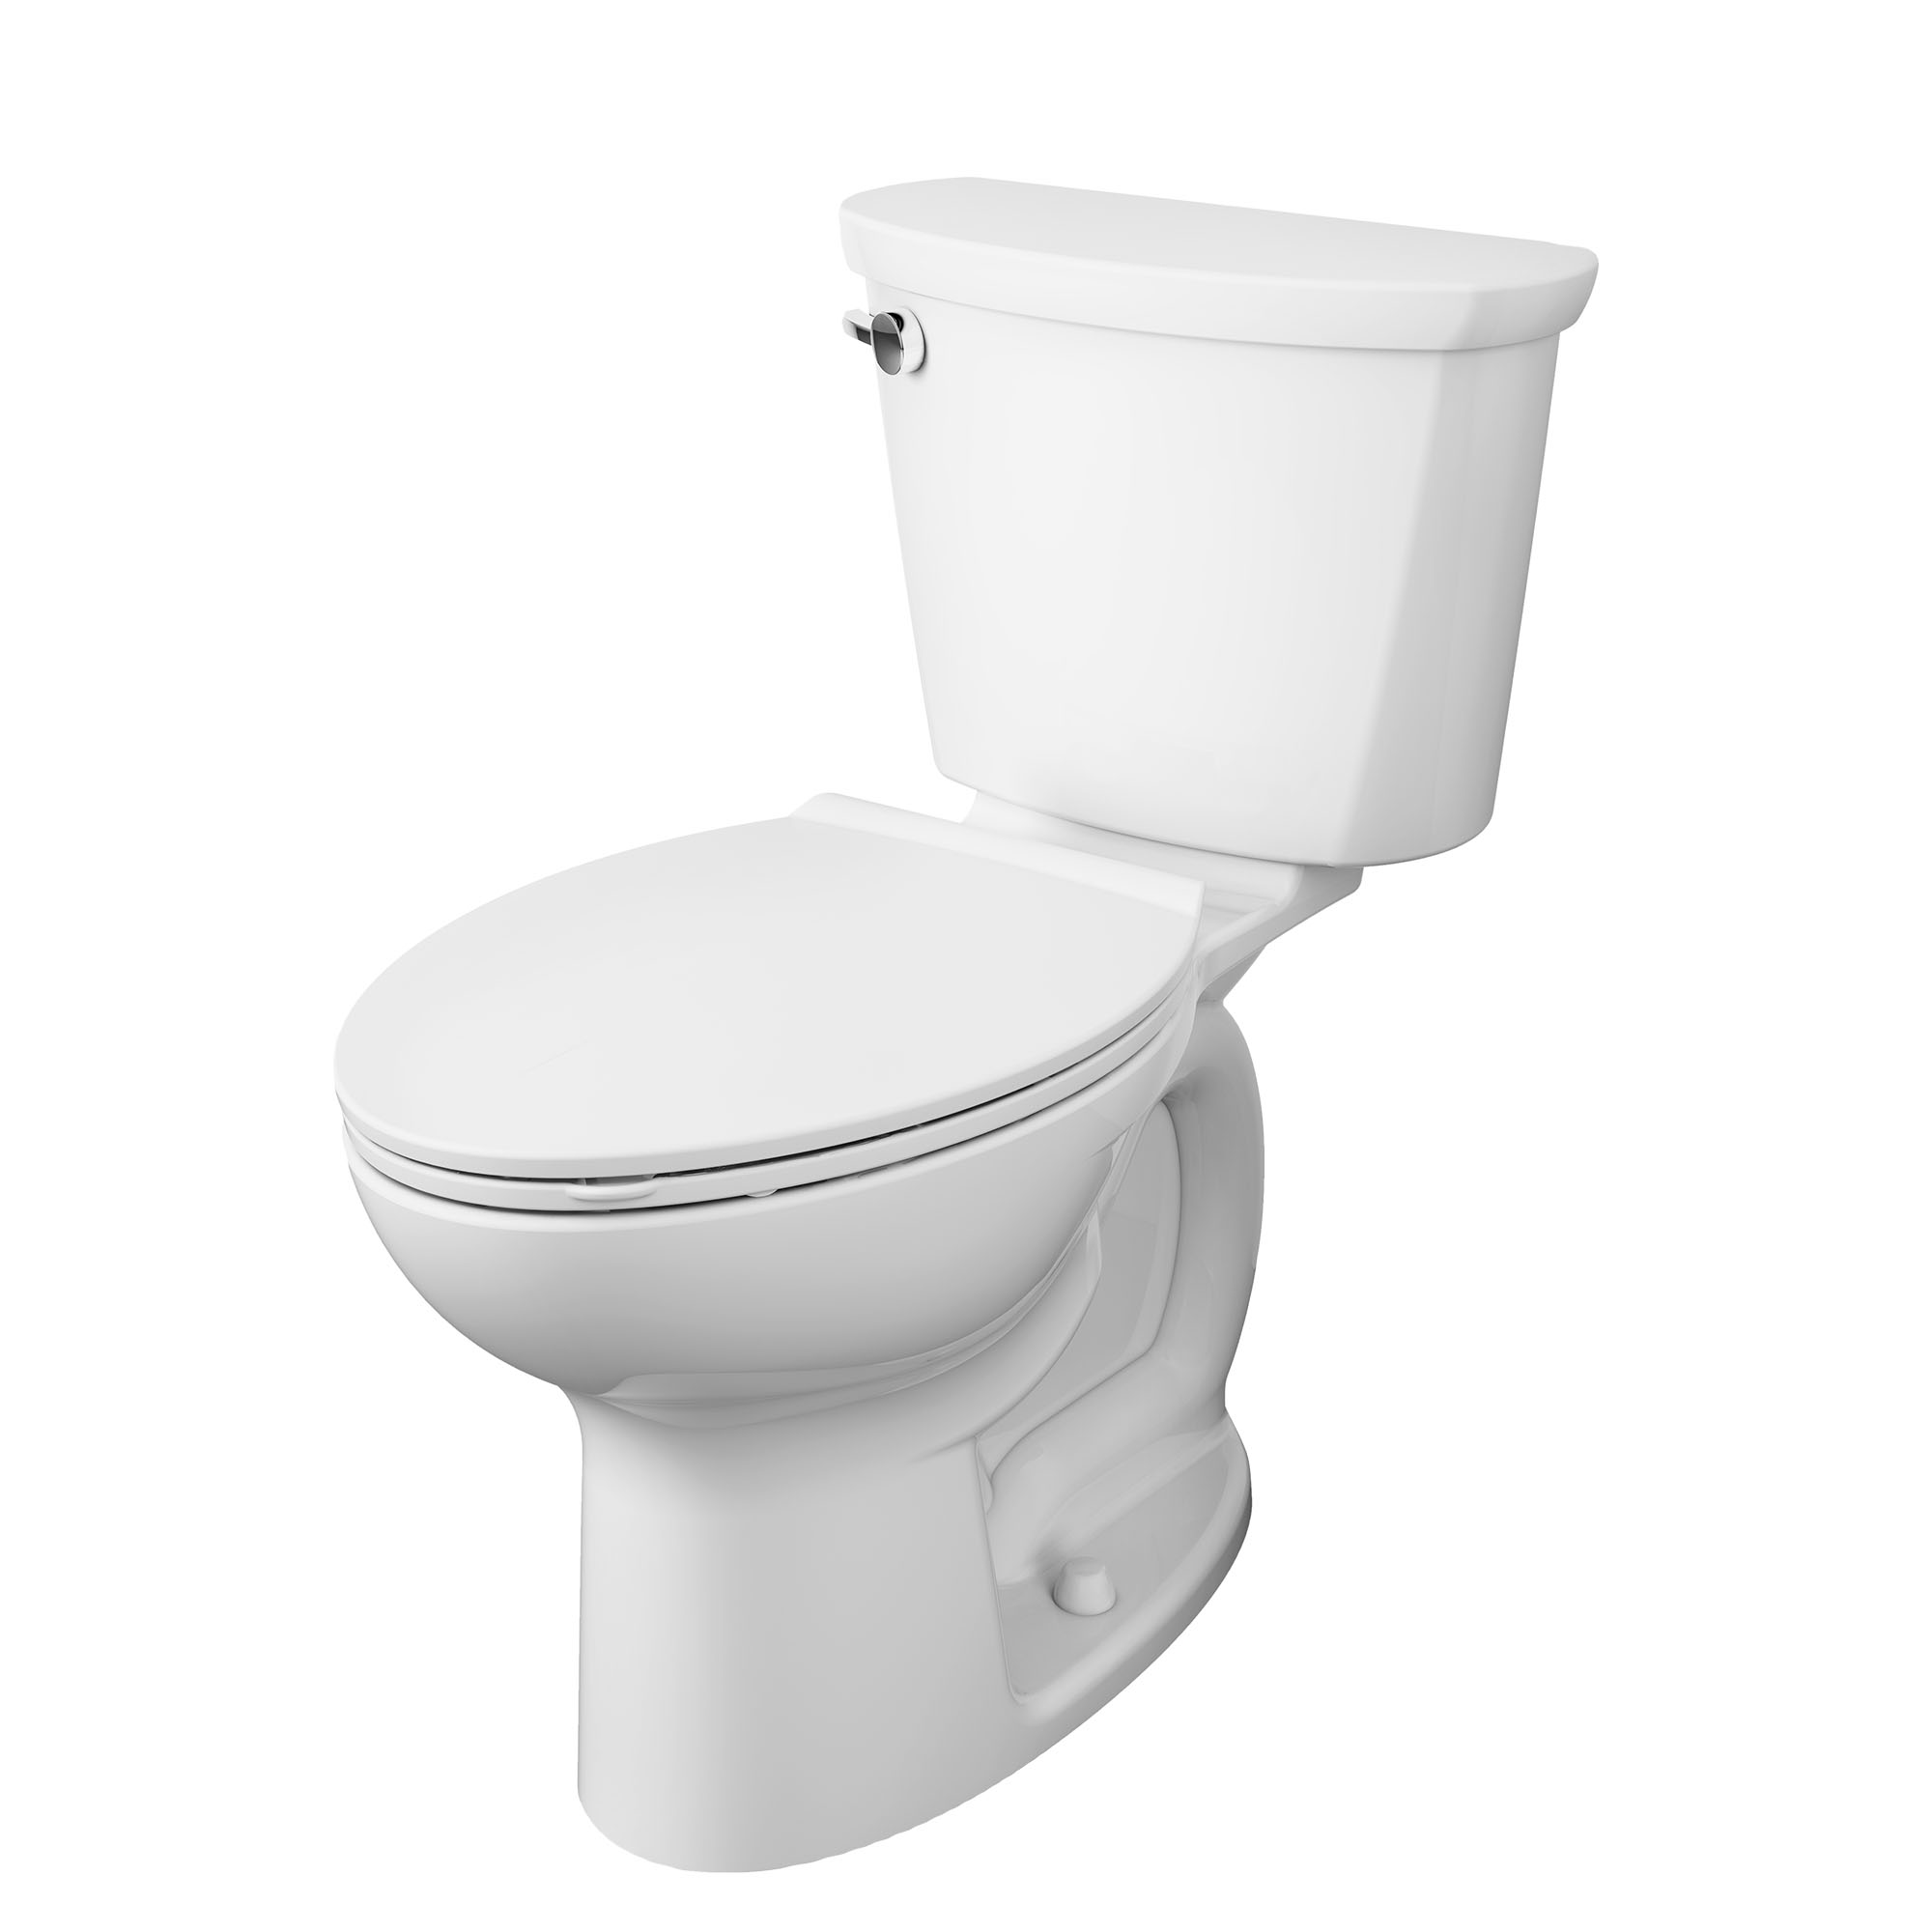 Cadet™ PRO Two-Piece 1.6 gpf/6.0 Lpf Compact Chair Height Elongated Toilet Less Seat